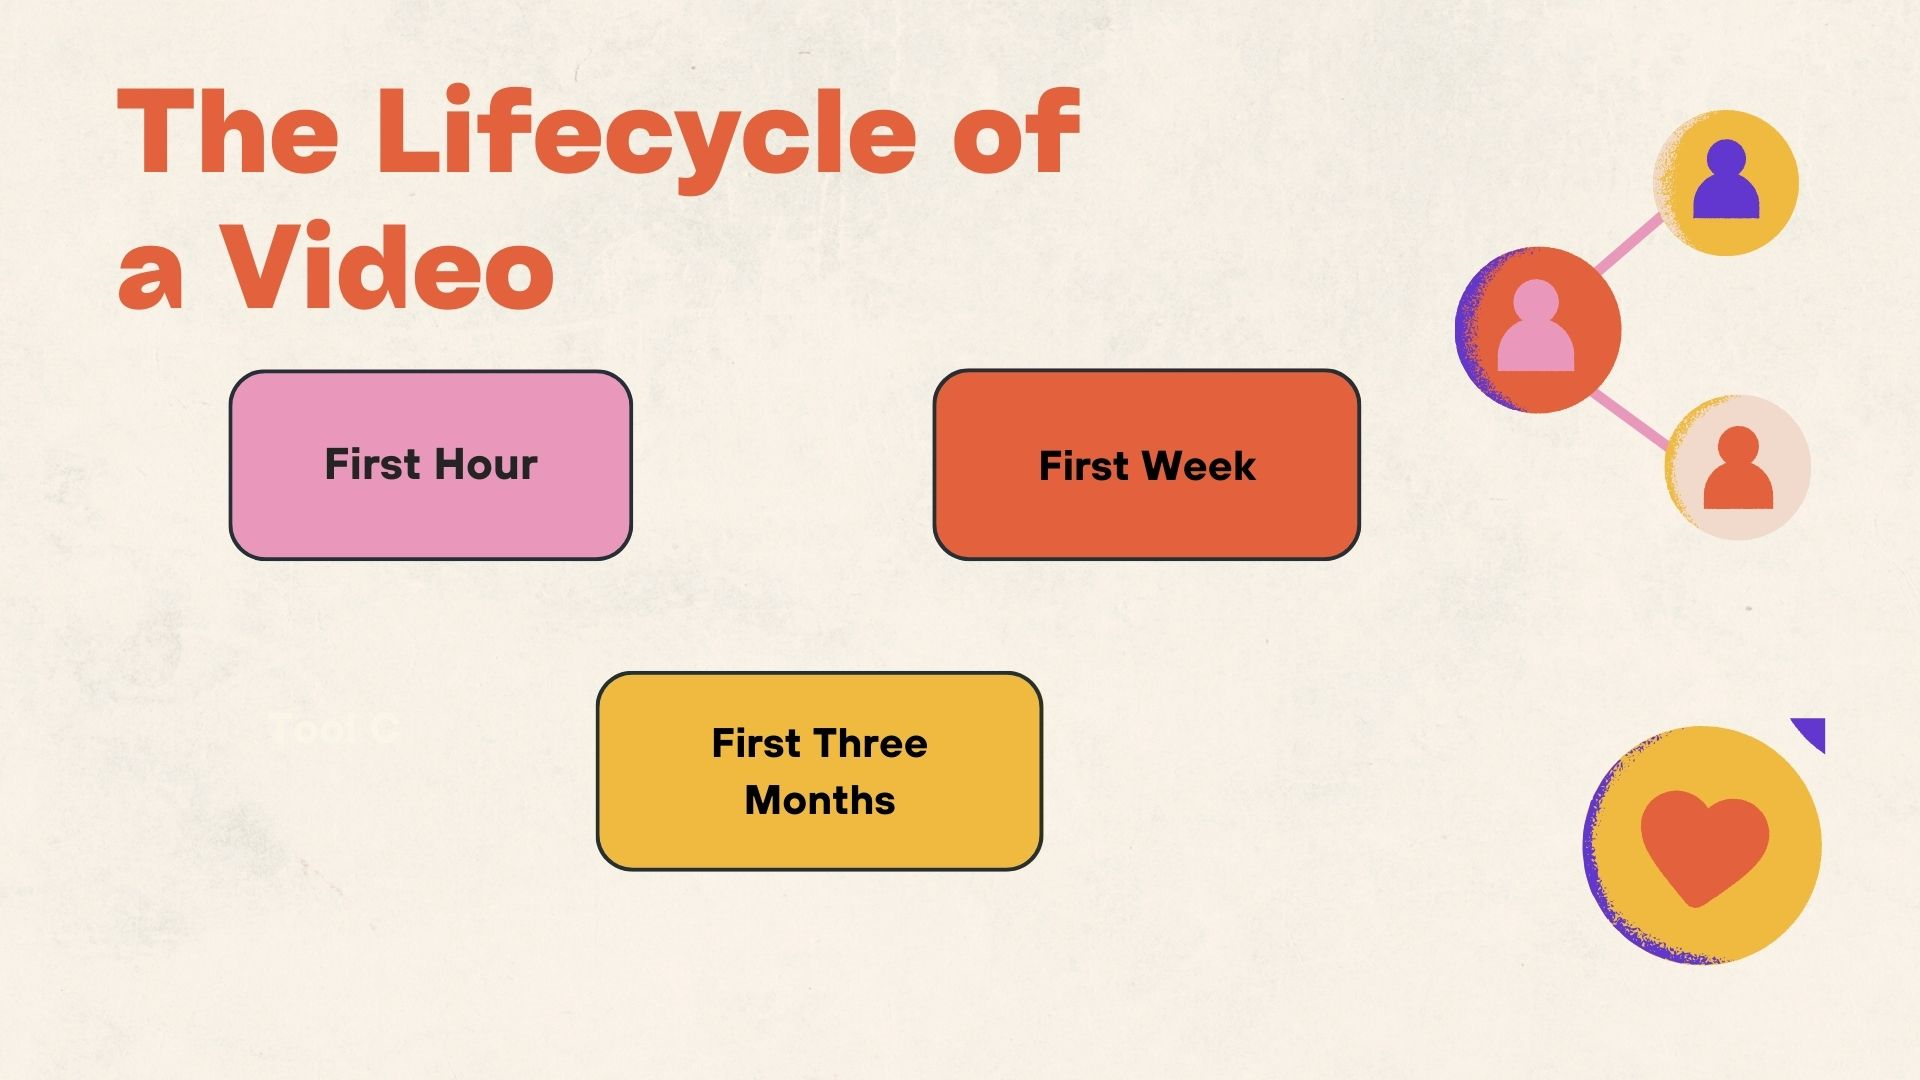 What Happens One Hour After Your Video Goes Viral?